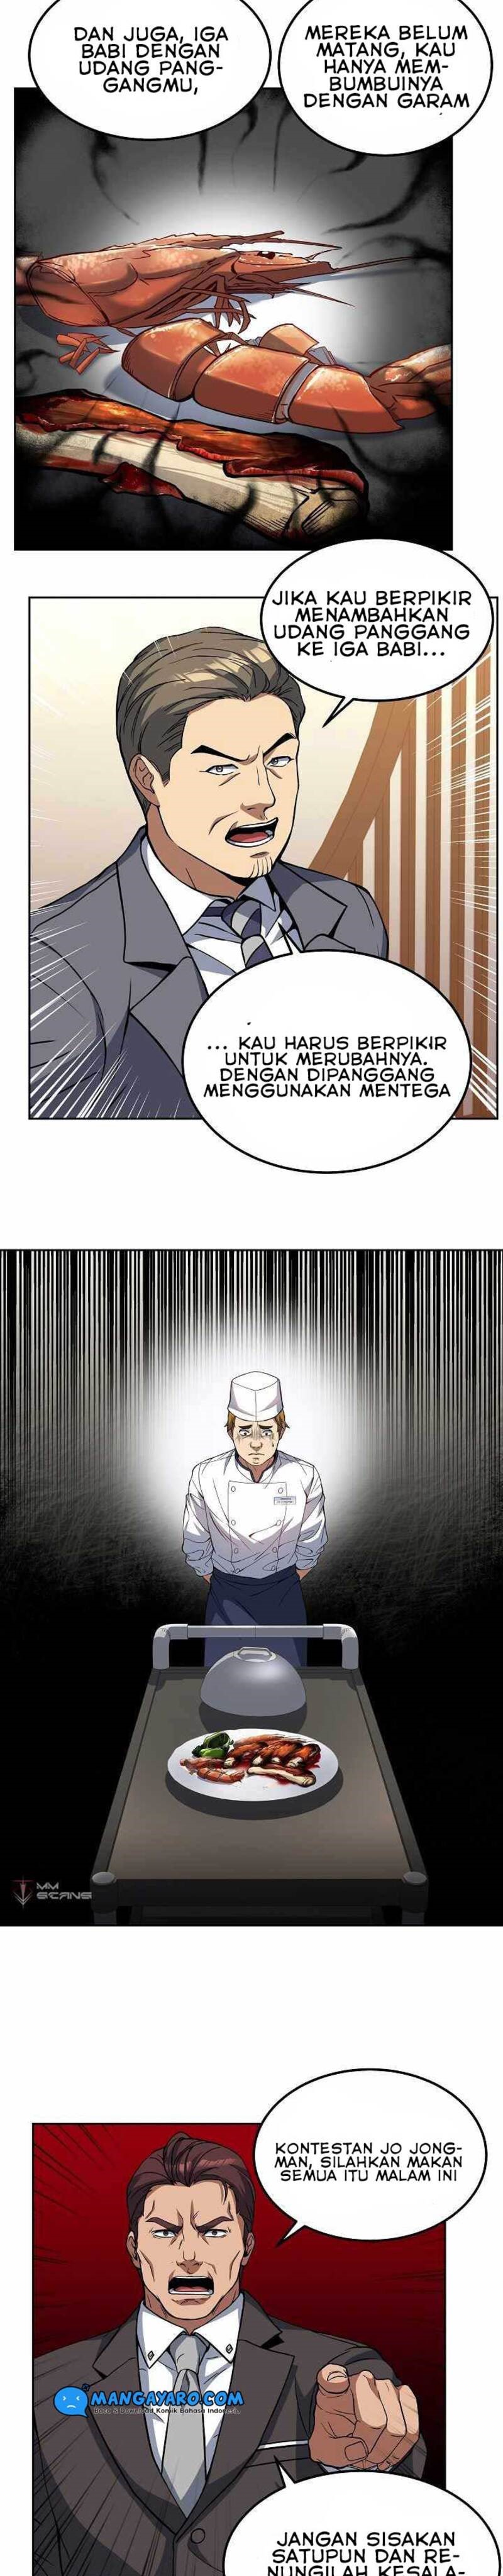 Youngest Chef From the 3rd Rate Hotel Chapter 14